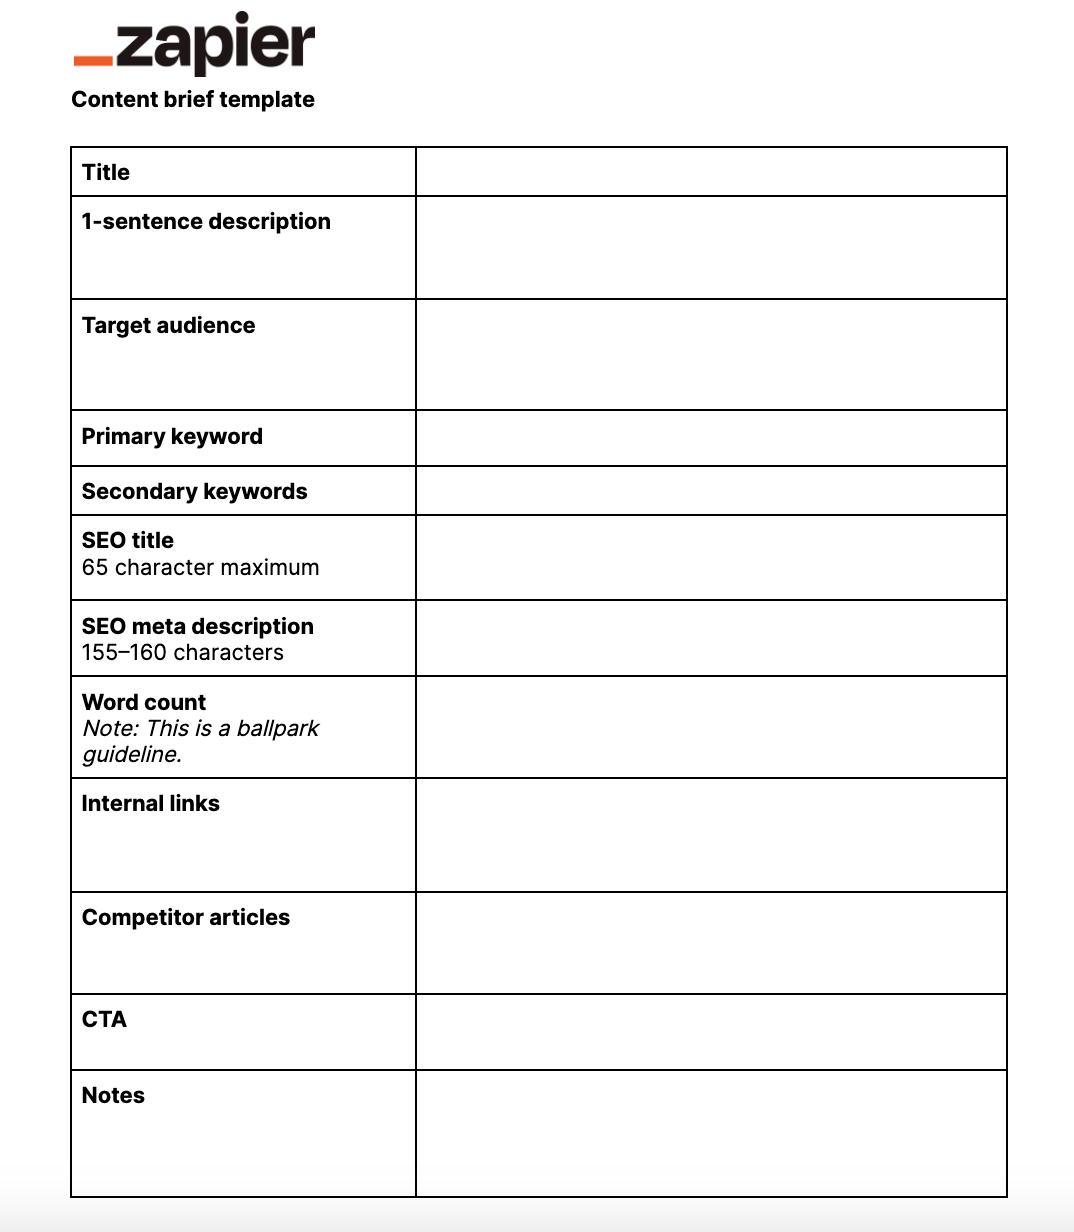 An image of the content brief template